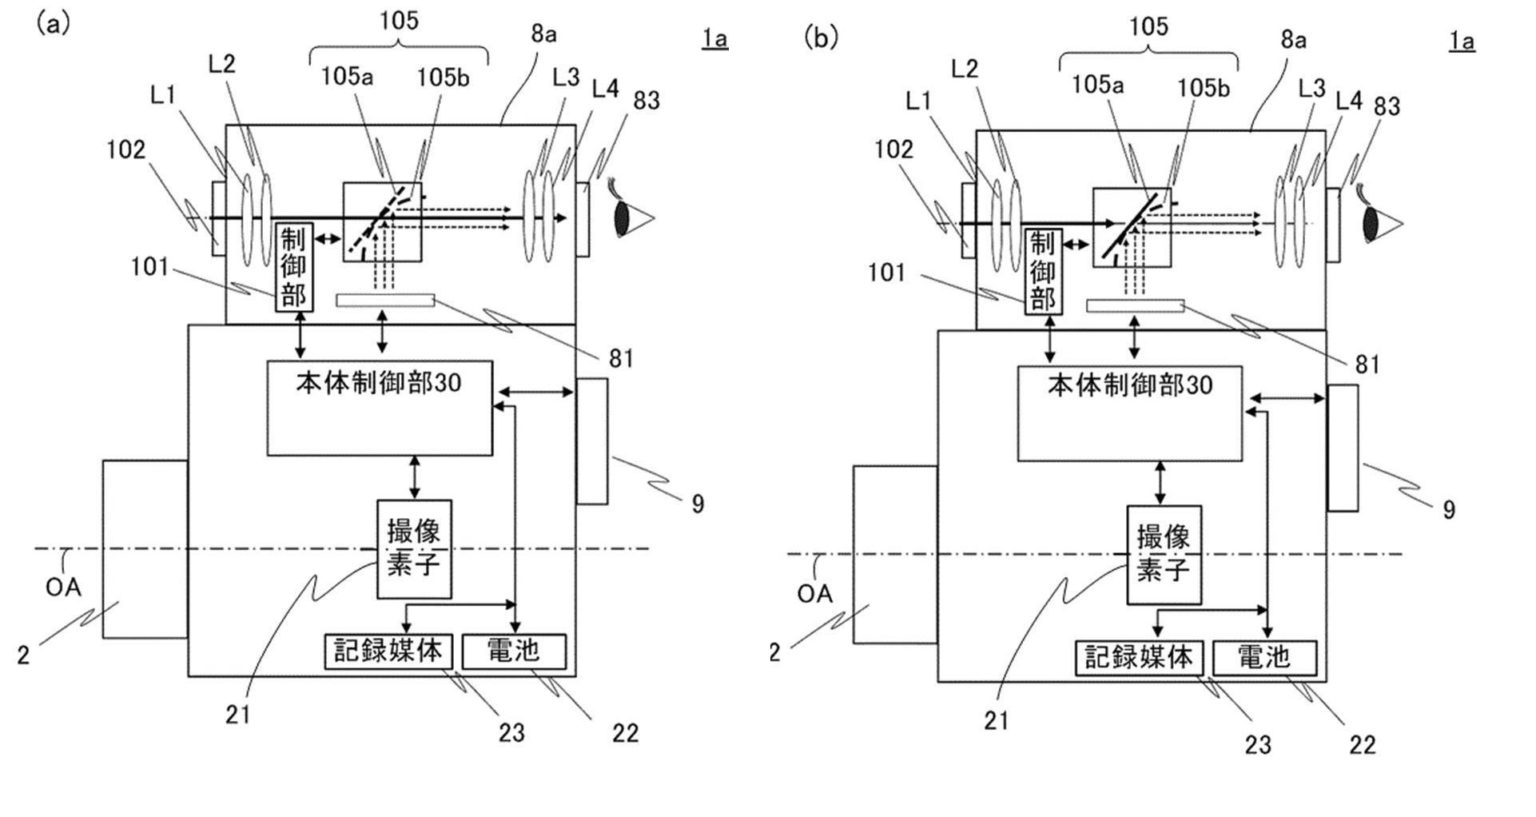 JPA 504023783 i 000006 1536x817 - Canon applies for a hybrid viewfinder patent